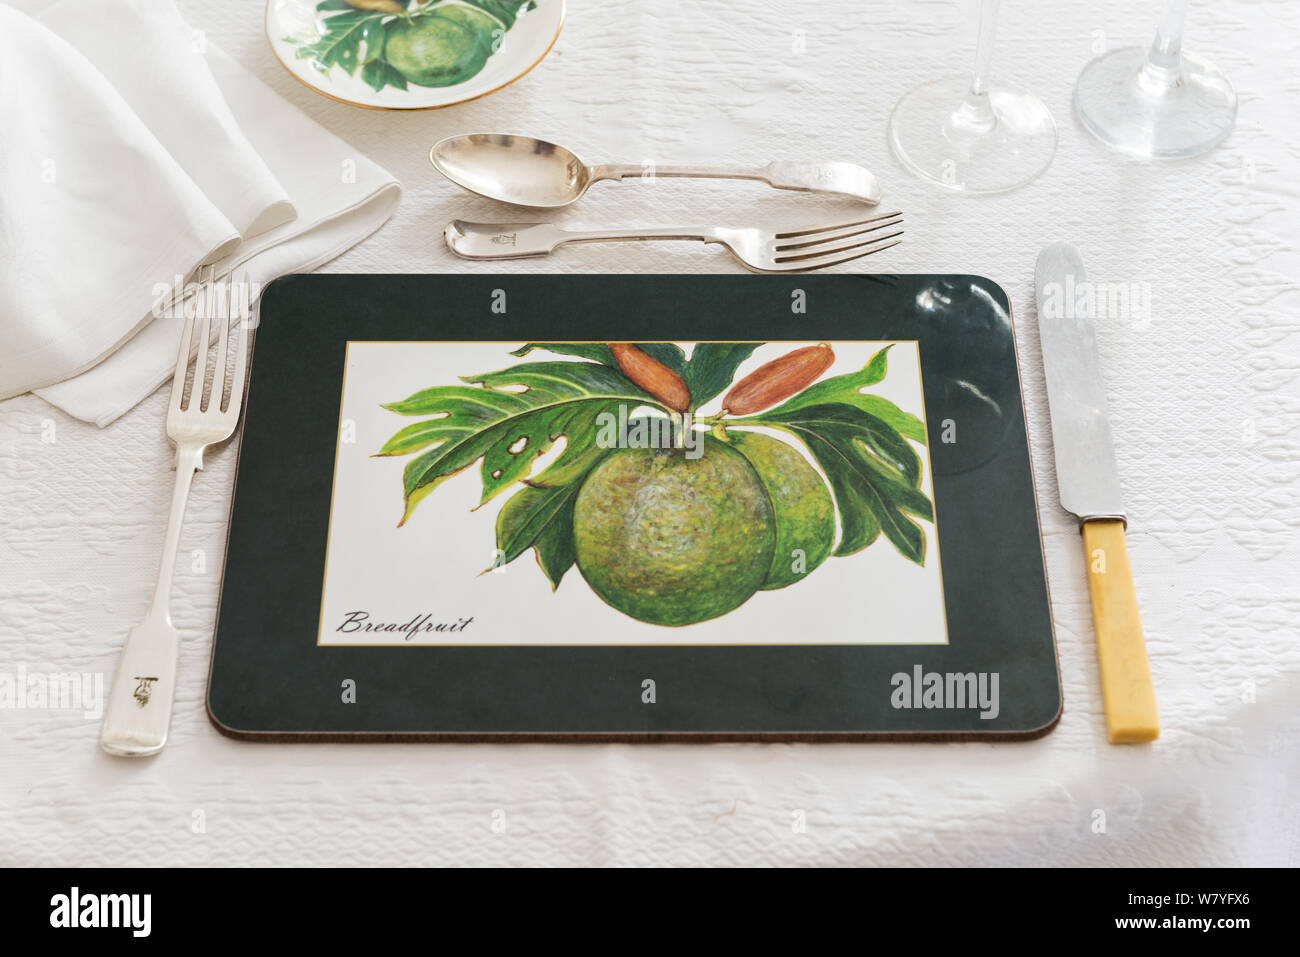 Table setting with place mat from Jenny Mein's breadfruit collection Stock Photo